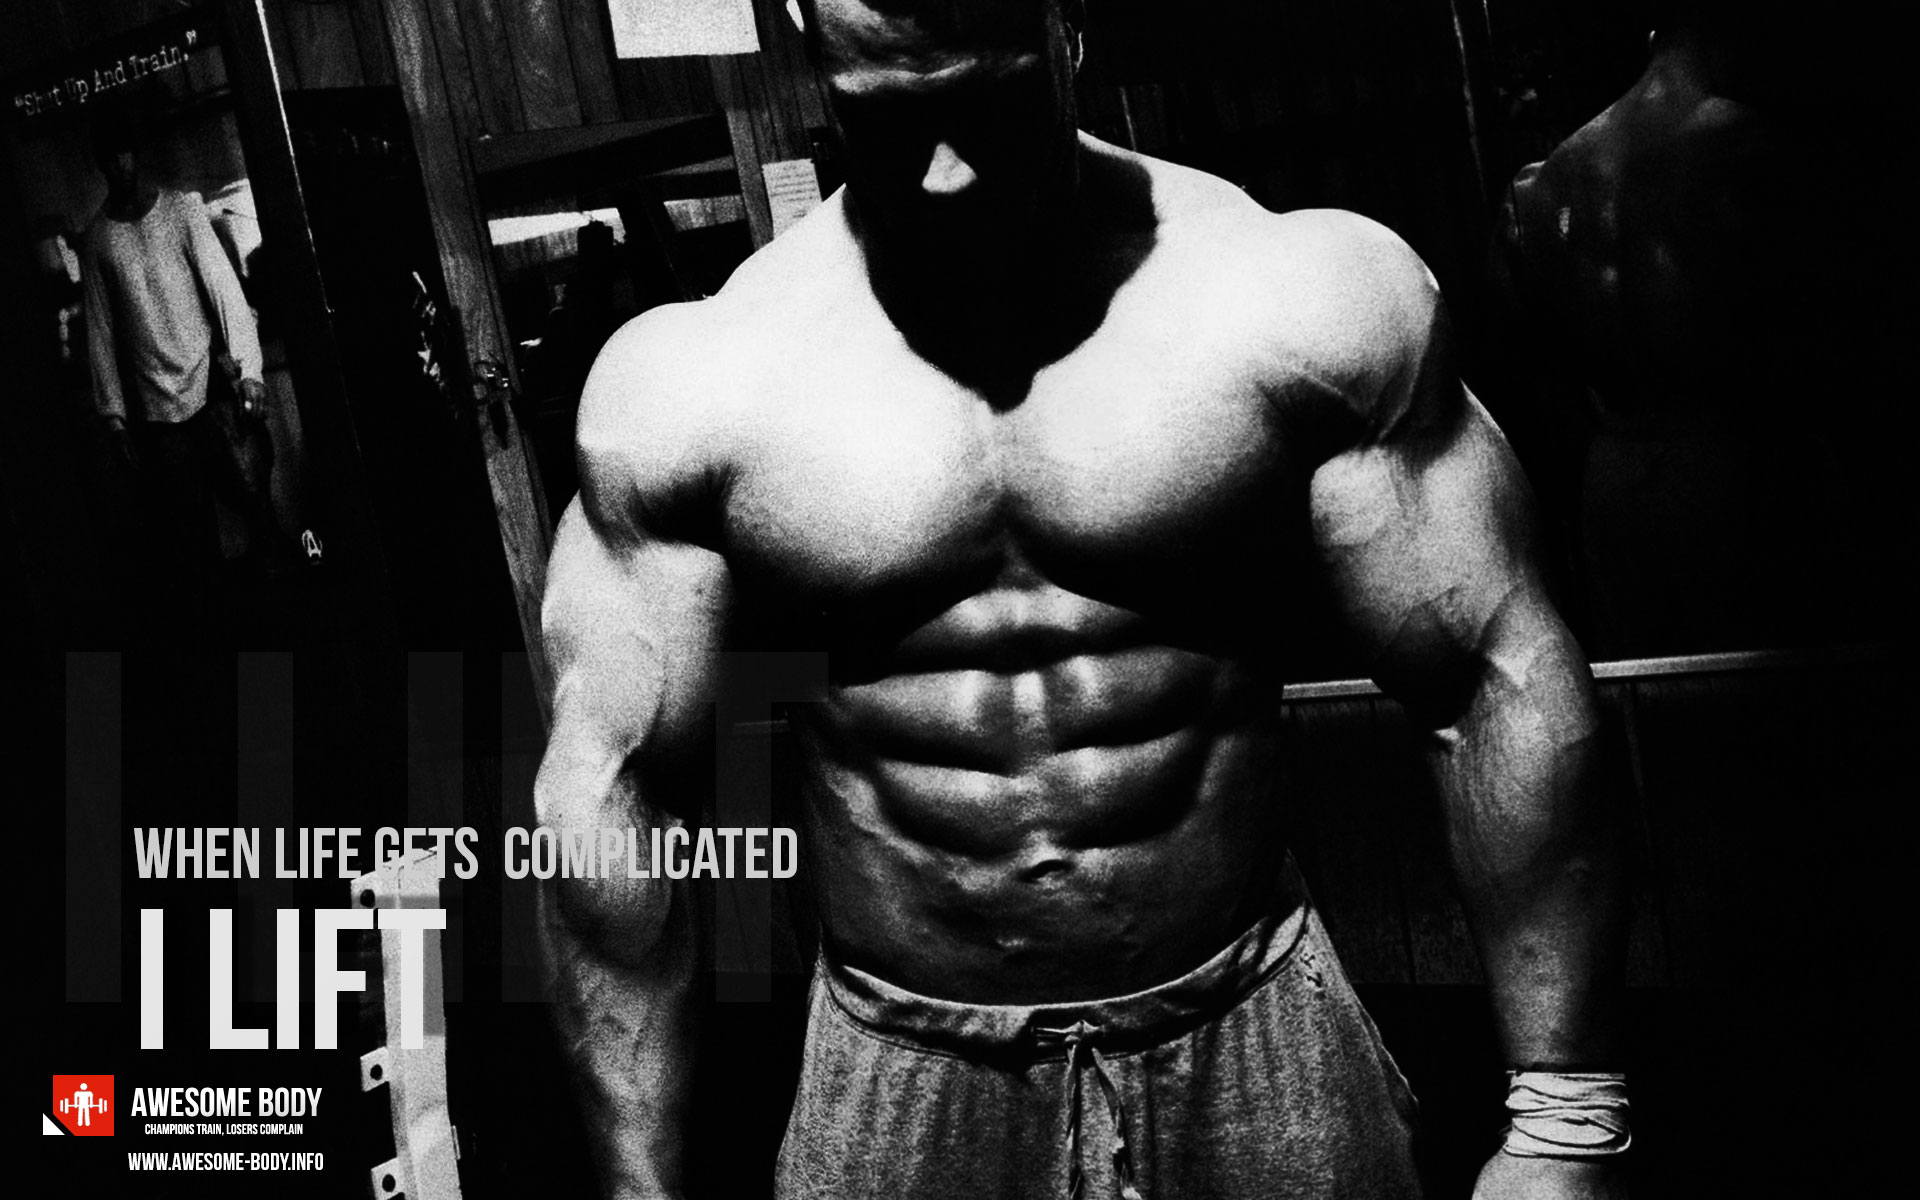 Wallpaper : Bodybuilder, muscles, working out, bodybuilding, Bane, muscle,  screenshot, black and white, monochrome photography 1920x1200 - bochin1976  - 138813 - HD Wallpapers - WallHere